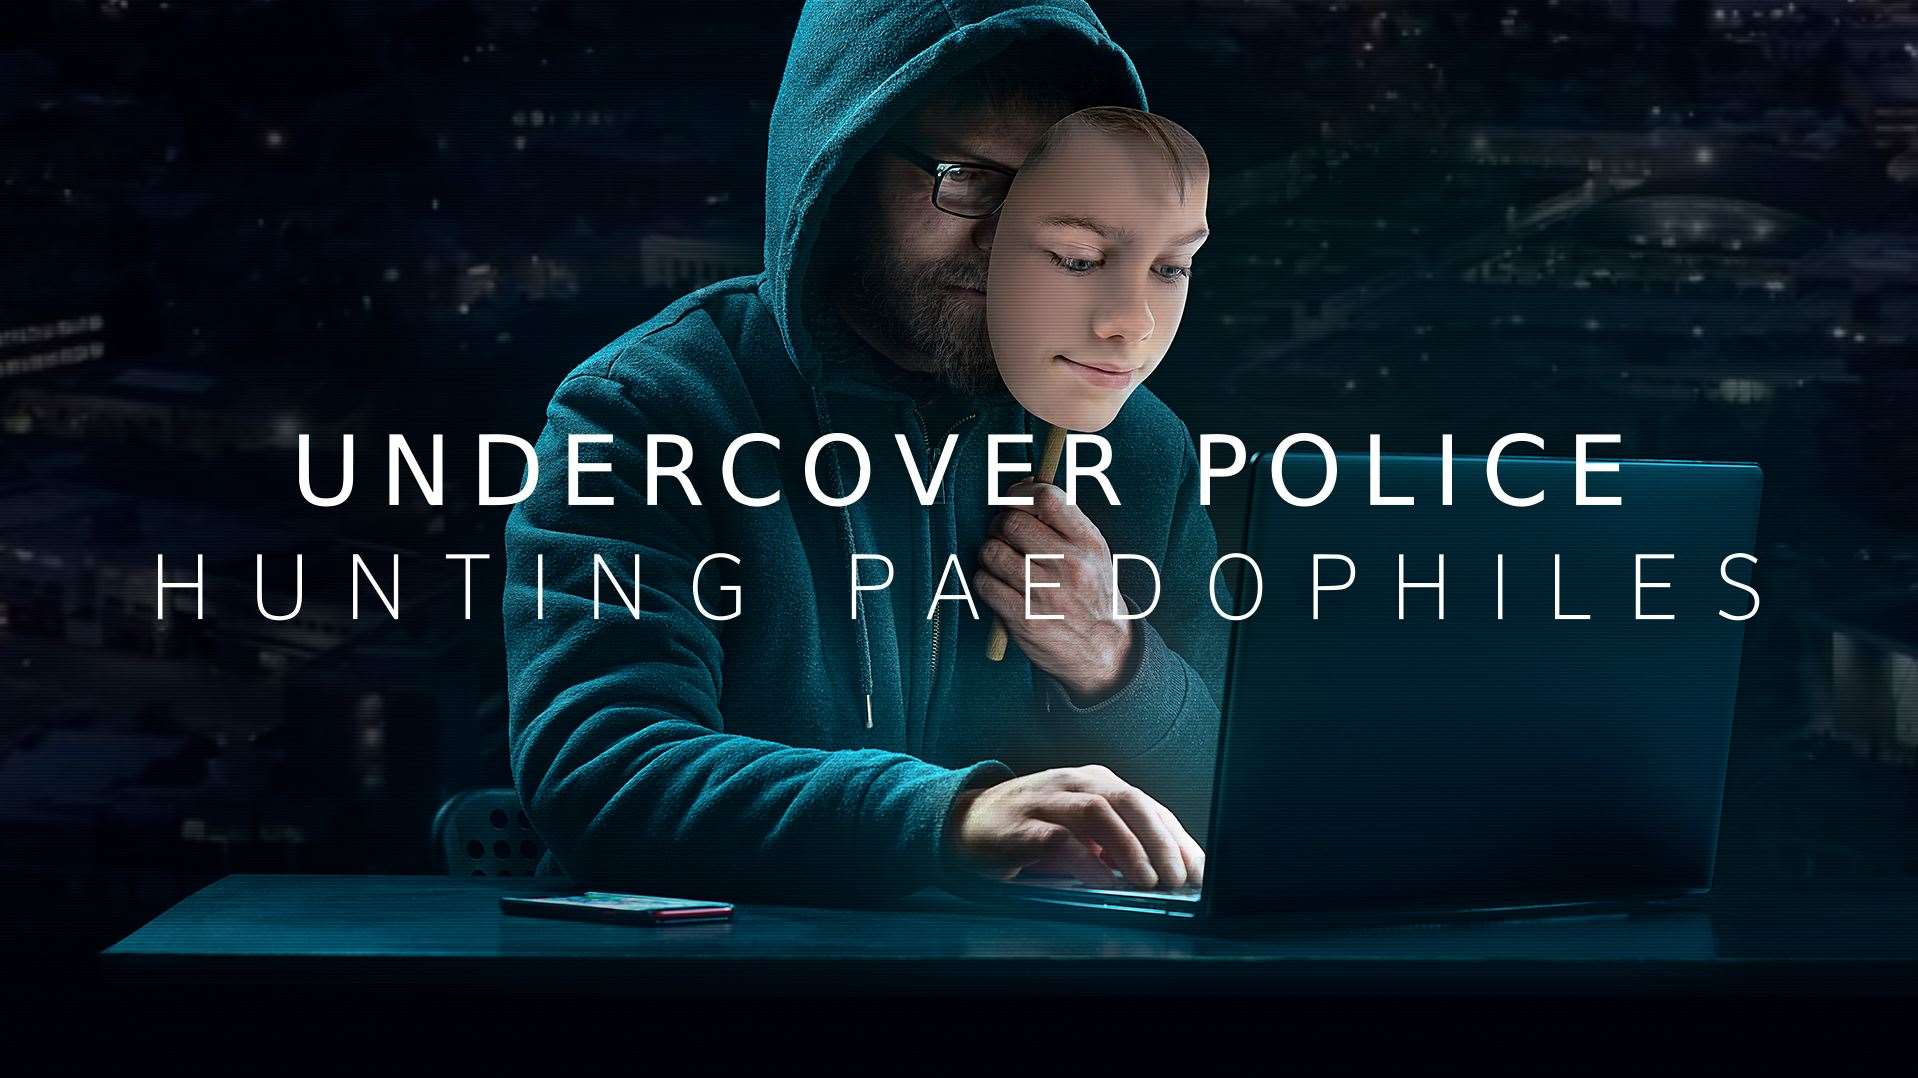 Undercover Police: Hunting Paedophiles based on cases handled by Kent Police starts on Channel 4 tonight